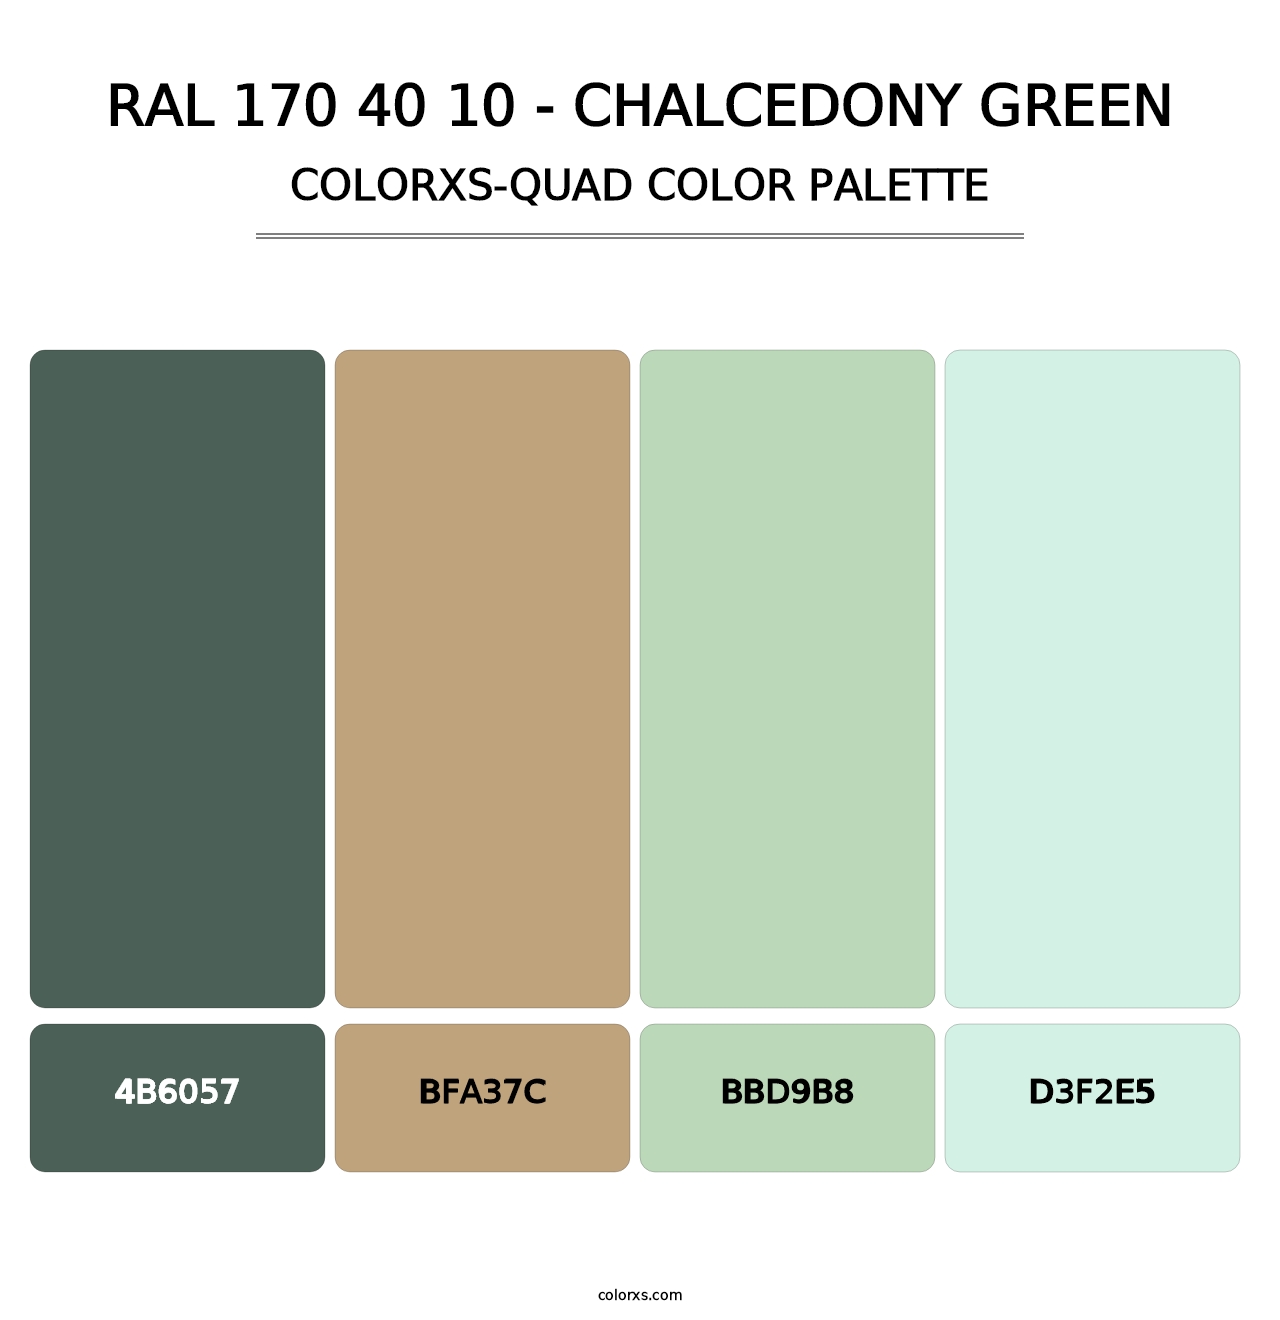 RAL 170 40 10 - Chalcedony Green - Colorxs Quad Palette